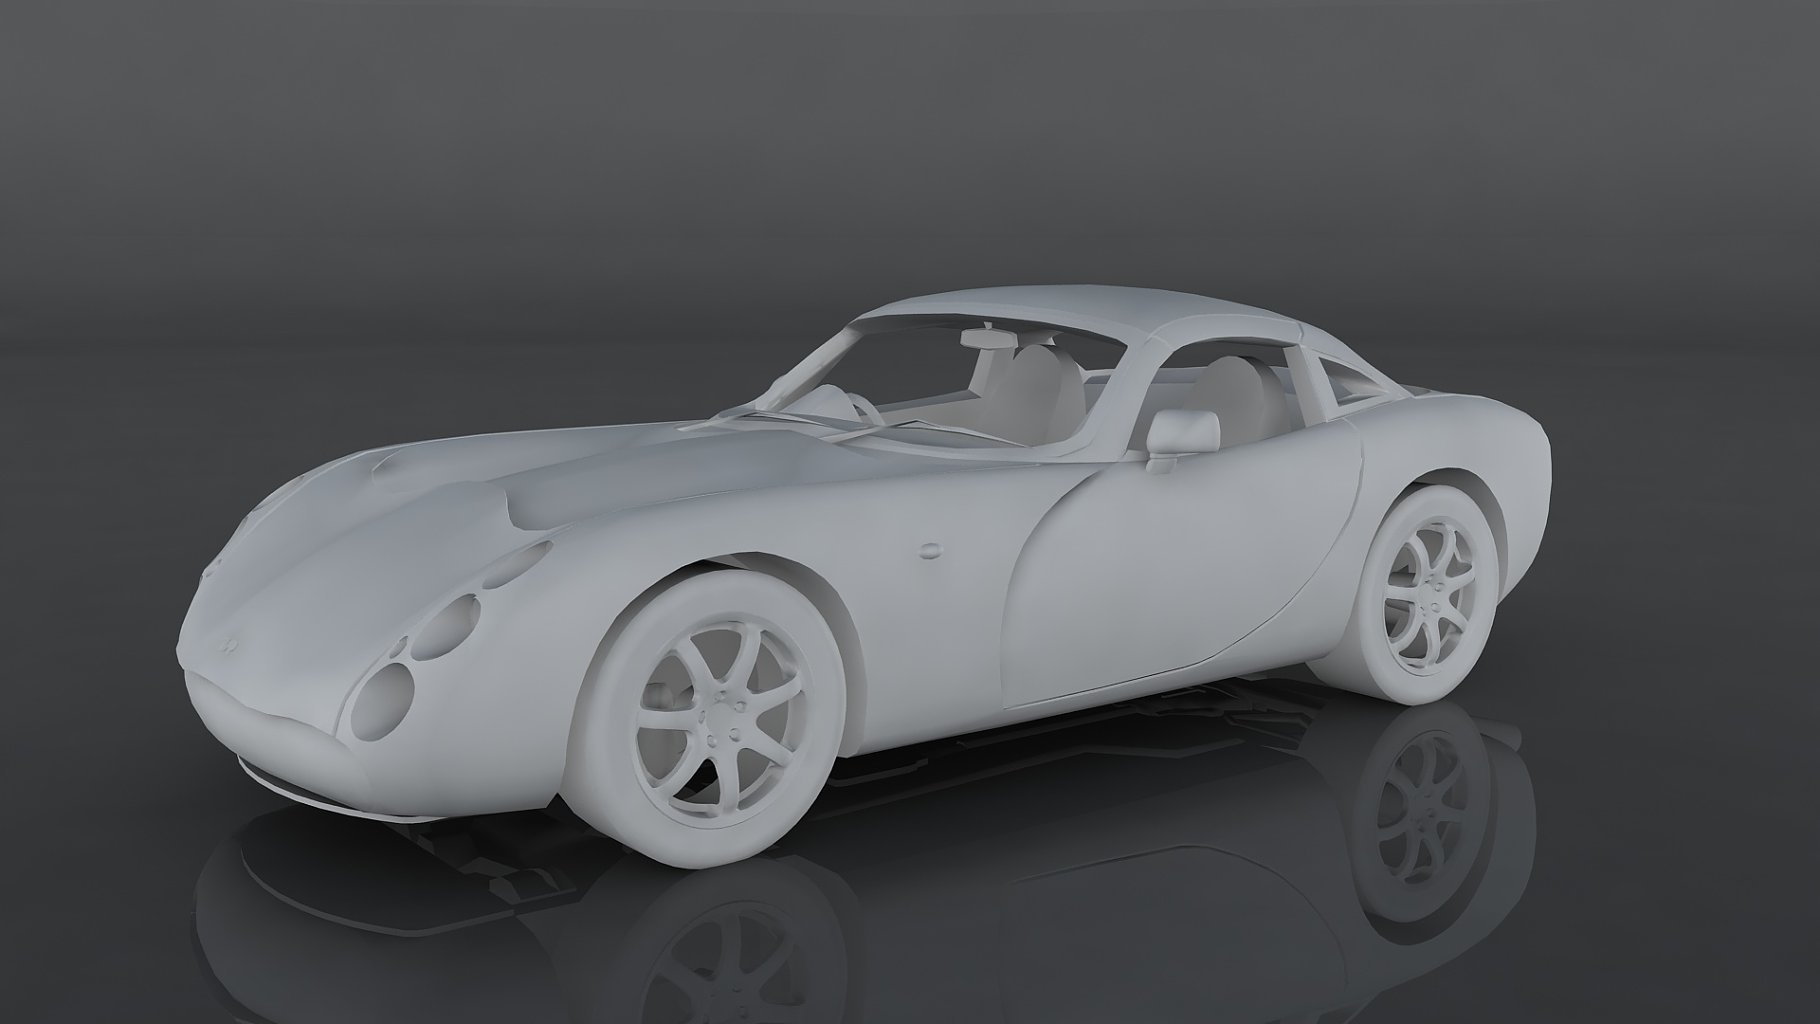 2001 tvr tuscan s gray mockup in the right side.